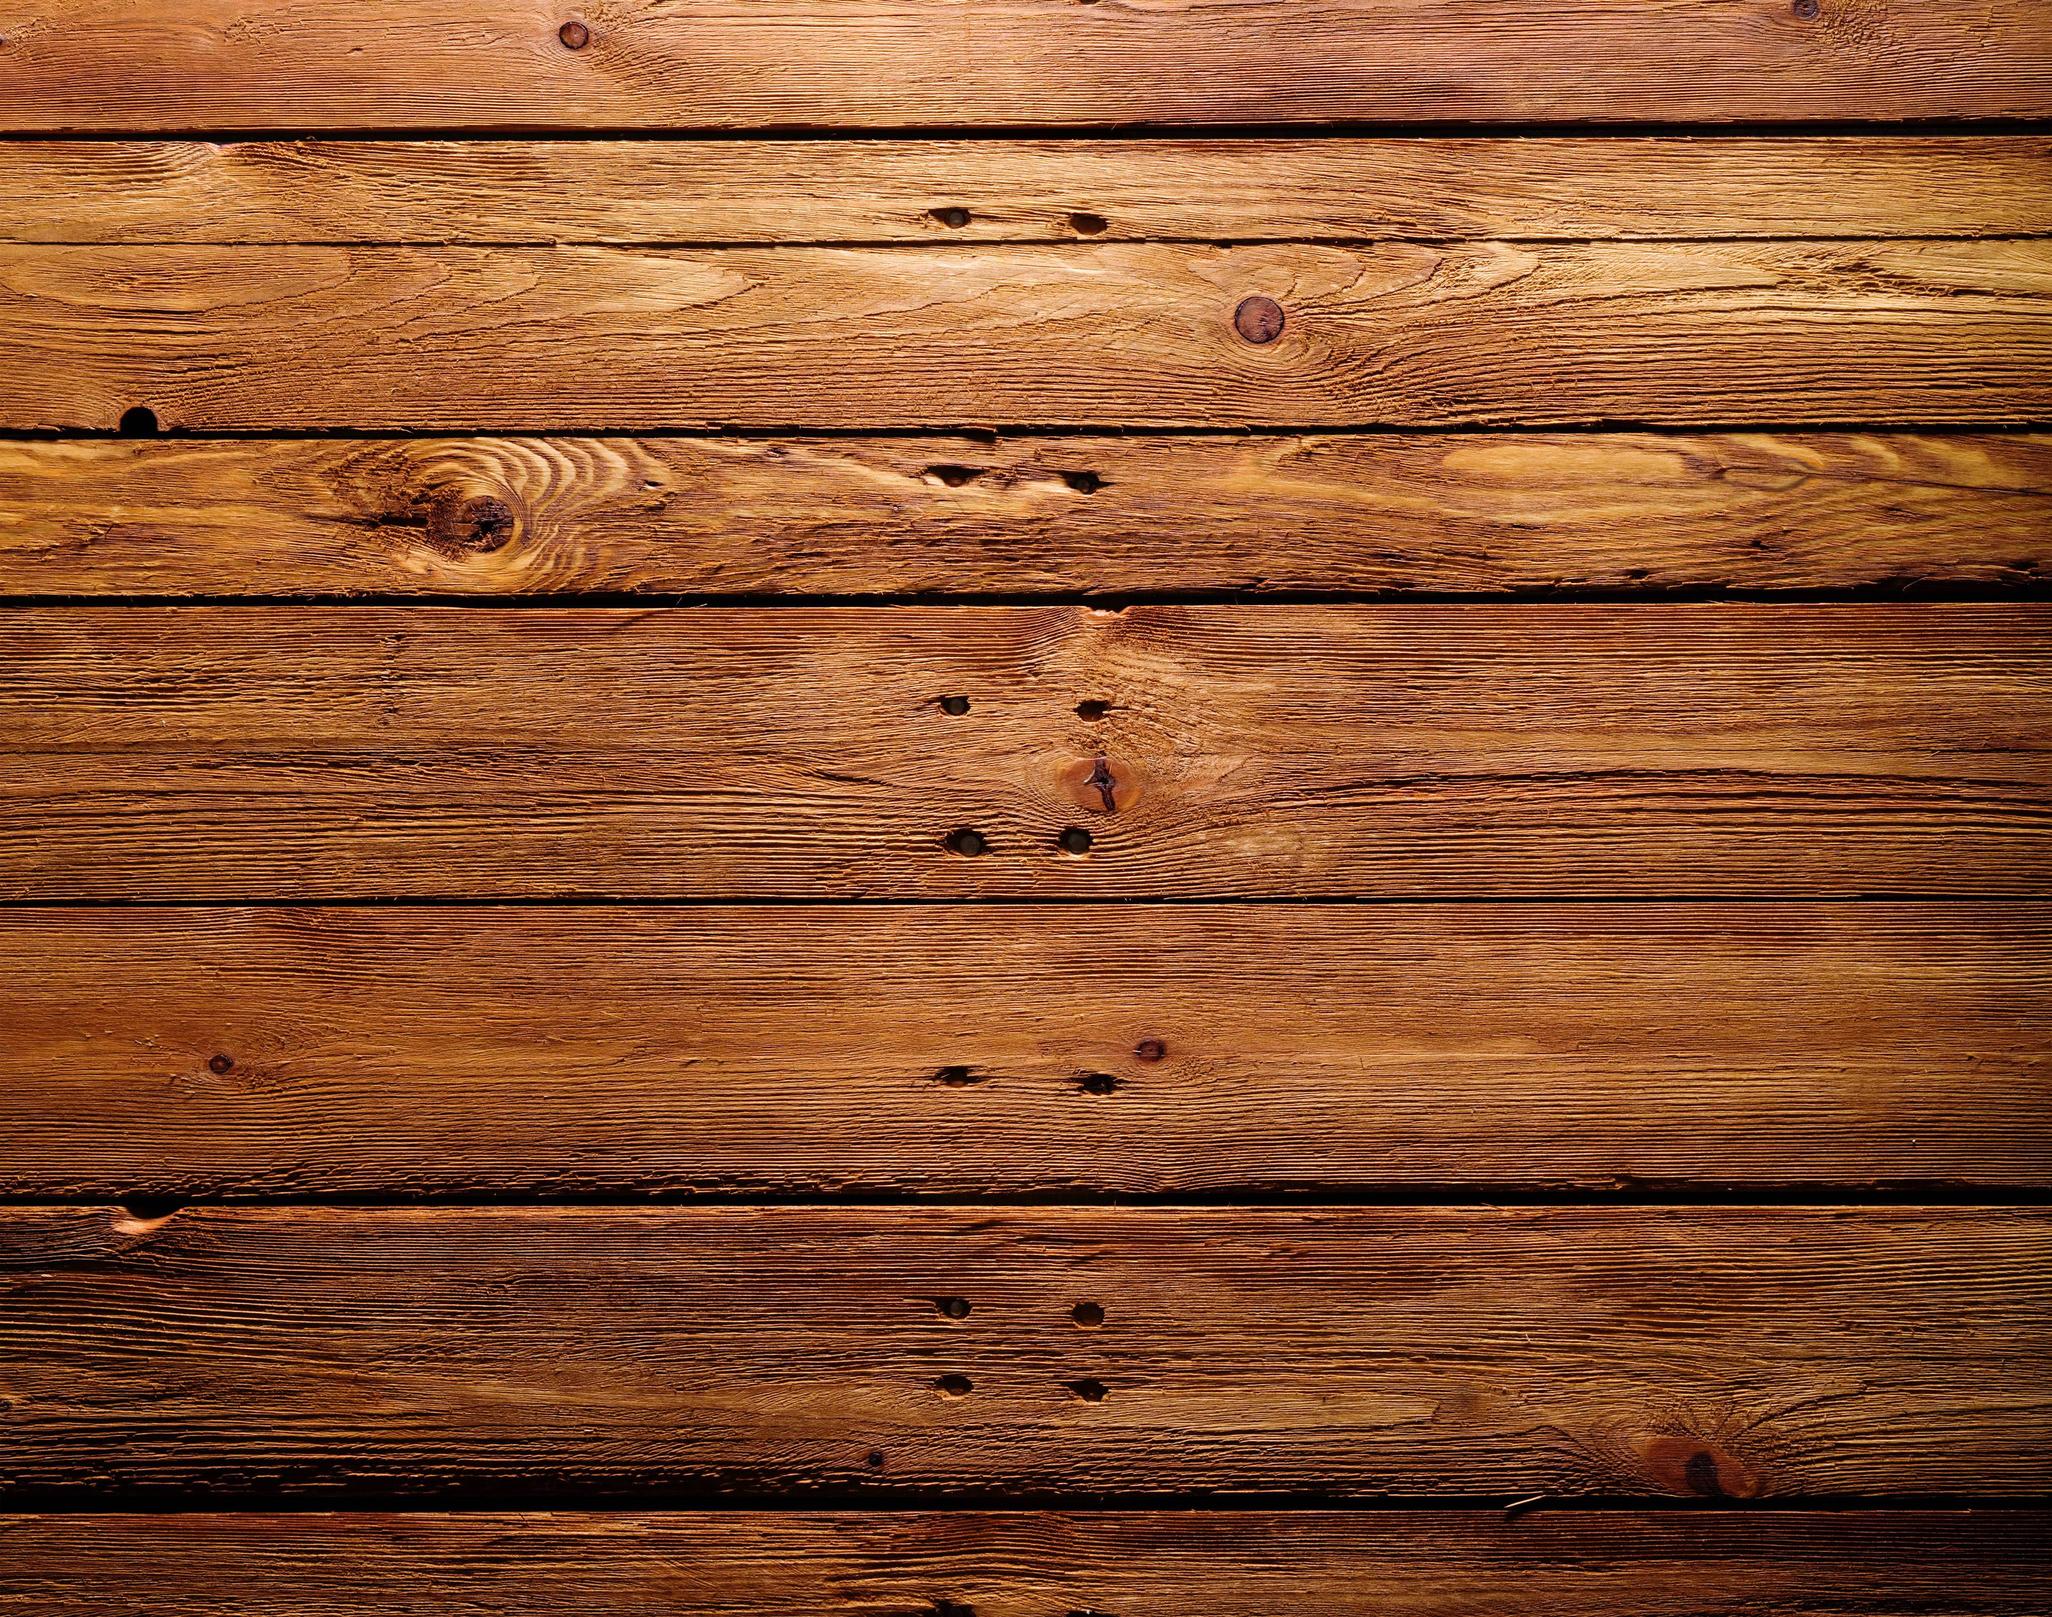 2013 06 Wood HD Wallpaper 08 Download3 The Mighty 1290 - KMMM